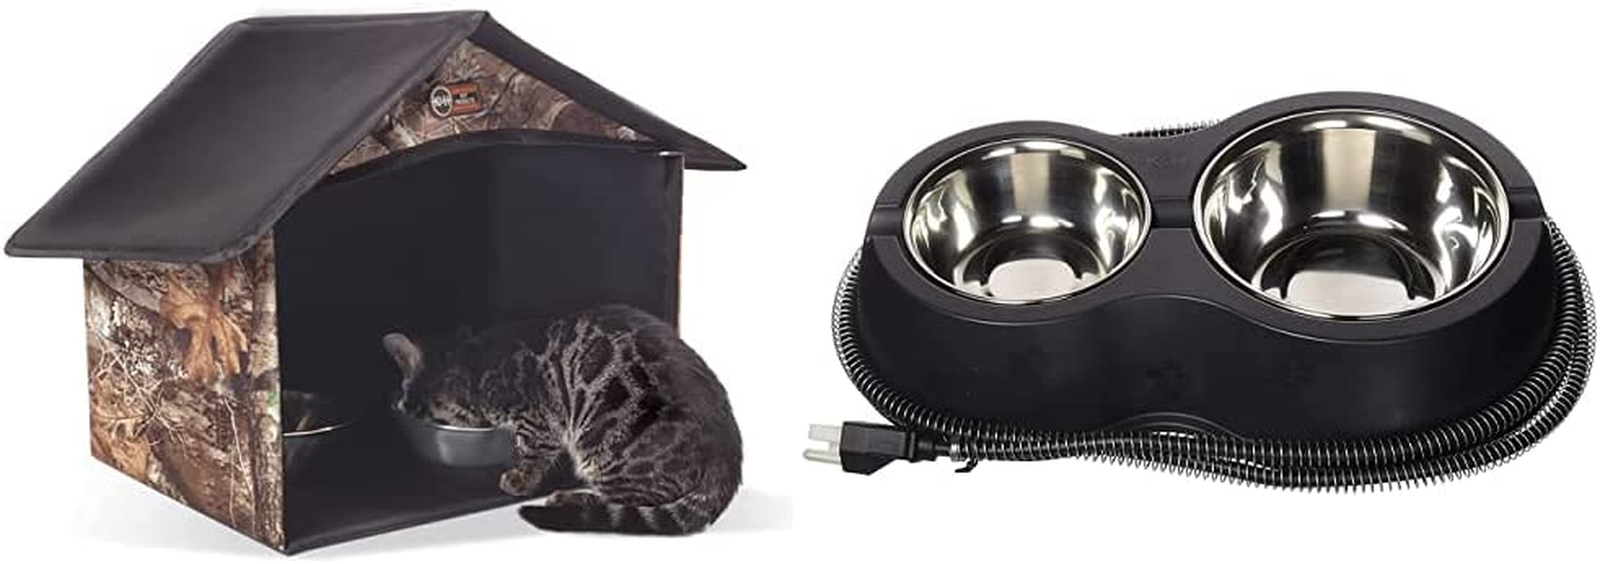 Kamp;H PET PRODUCTS Outdoor Kitty Dining Room Olive 14 X 20 X 16.5 Inches  eBay